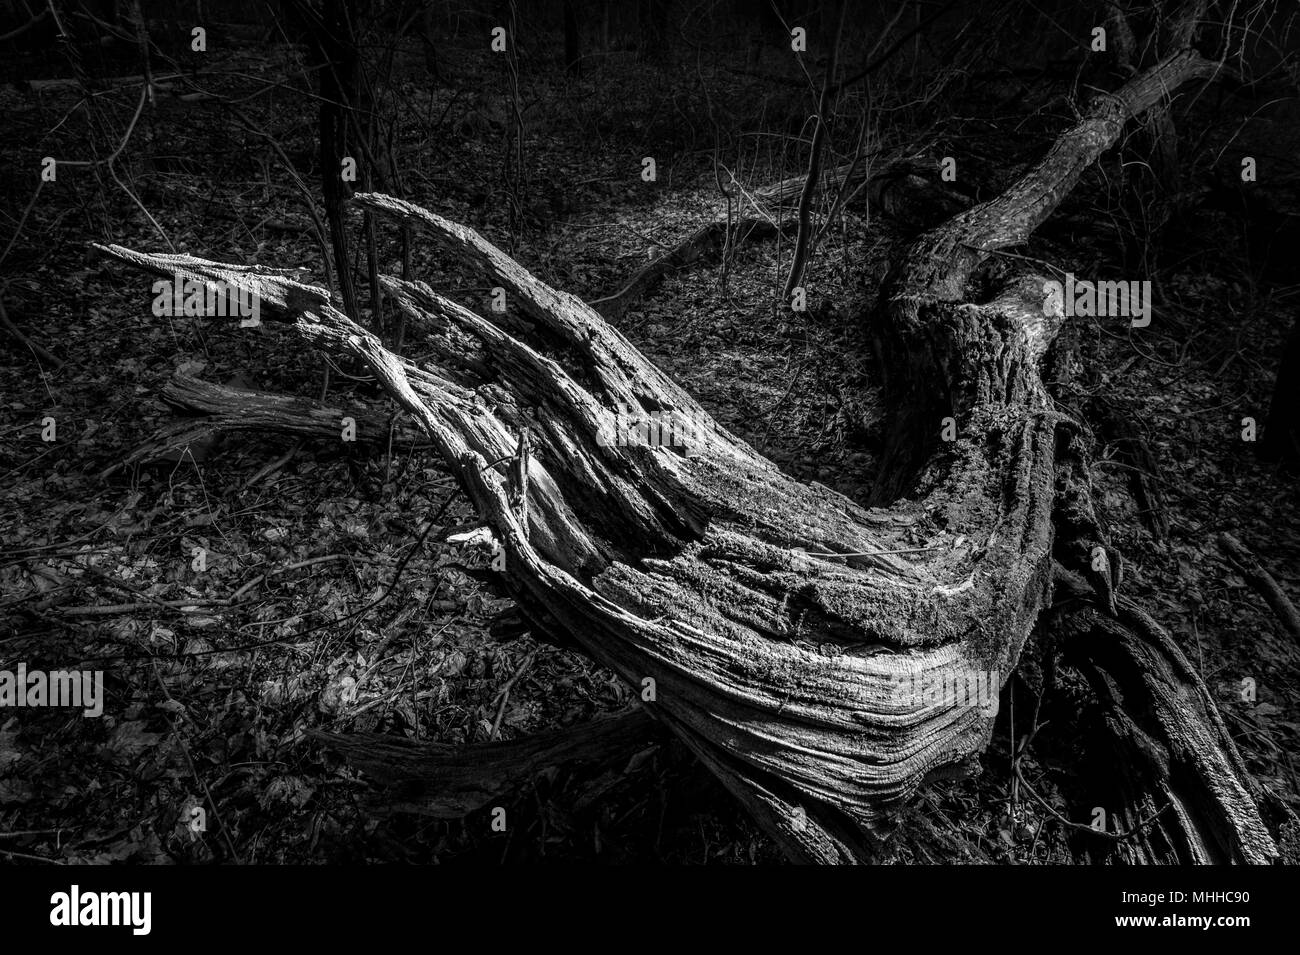 Artistic View Of Fallen Tree At Night Stock Photo